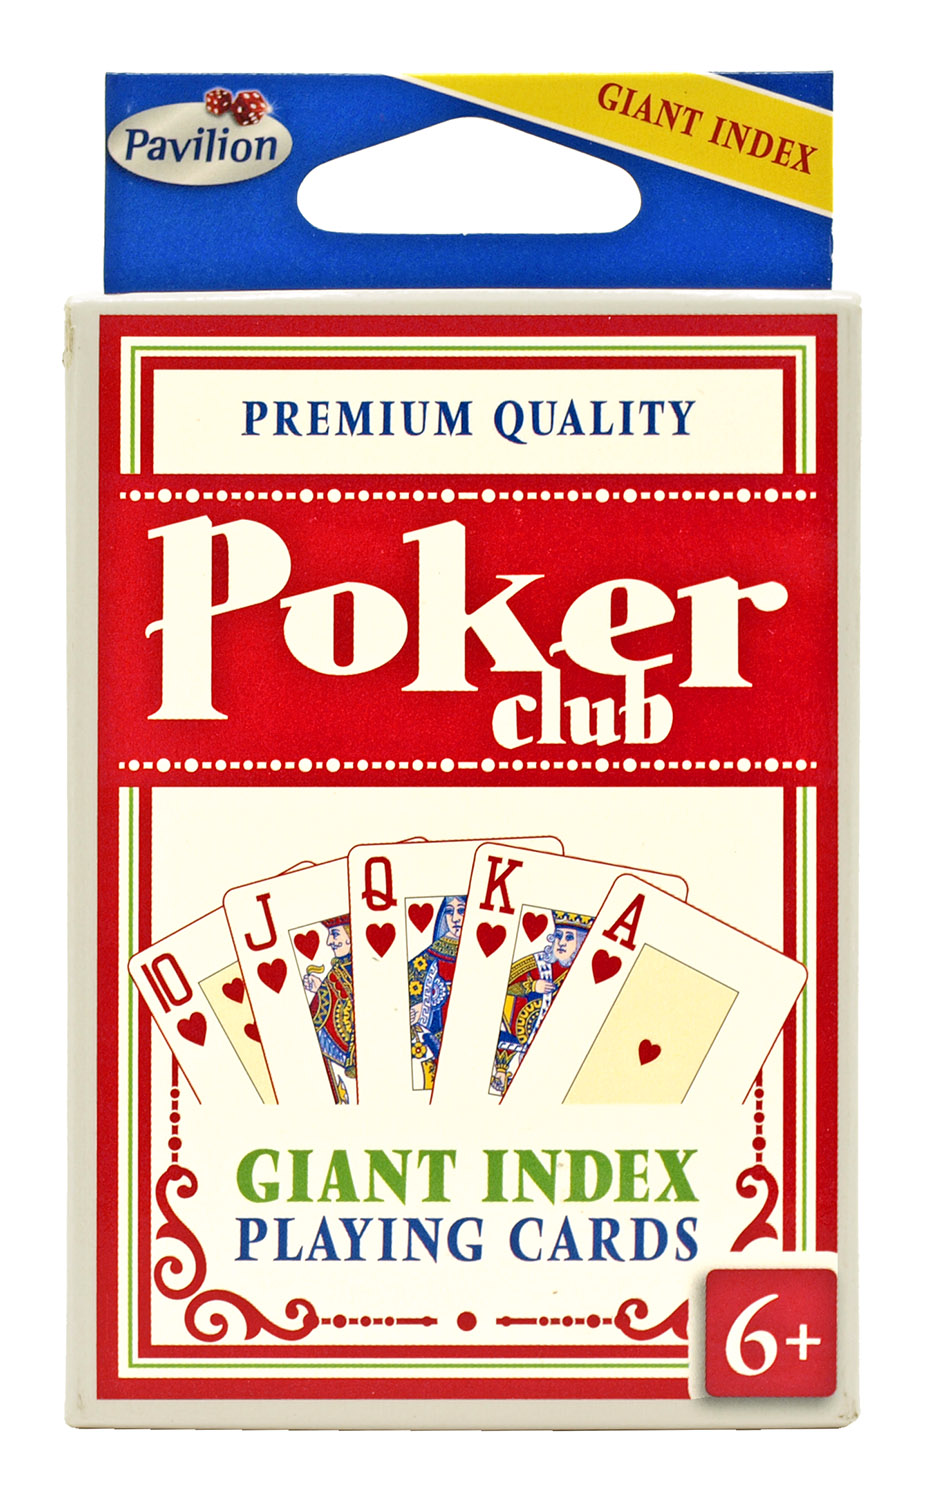 Poker Club Giant Index PLAYING CARDS